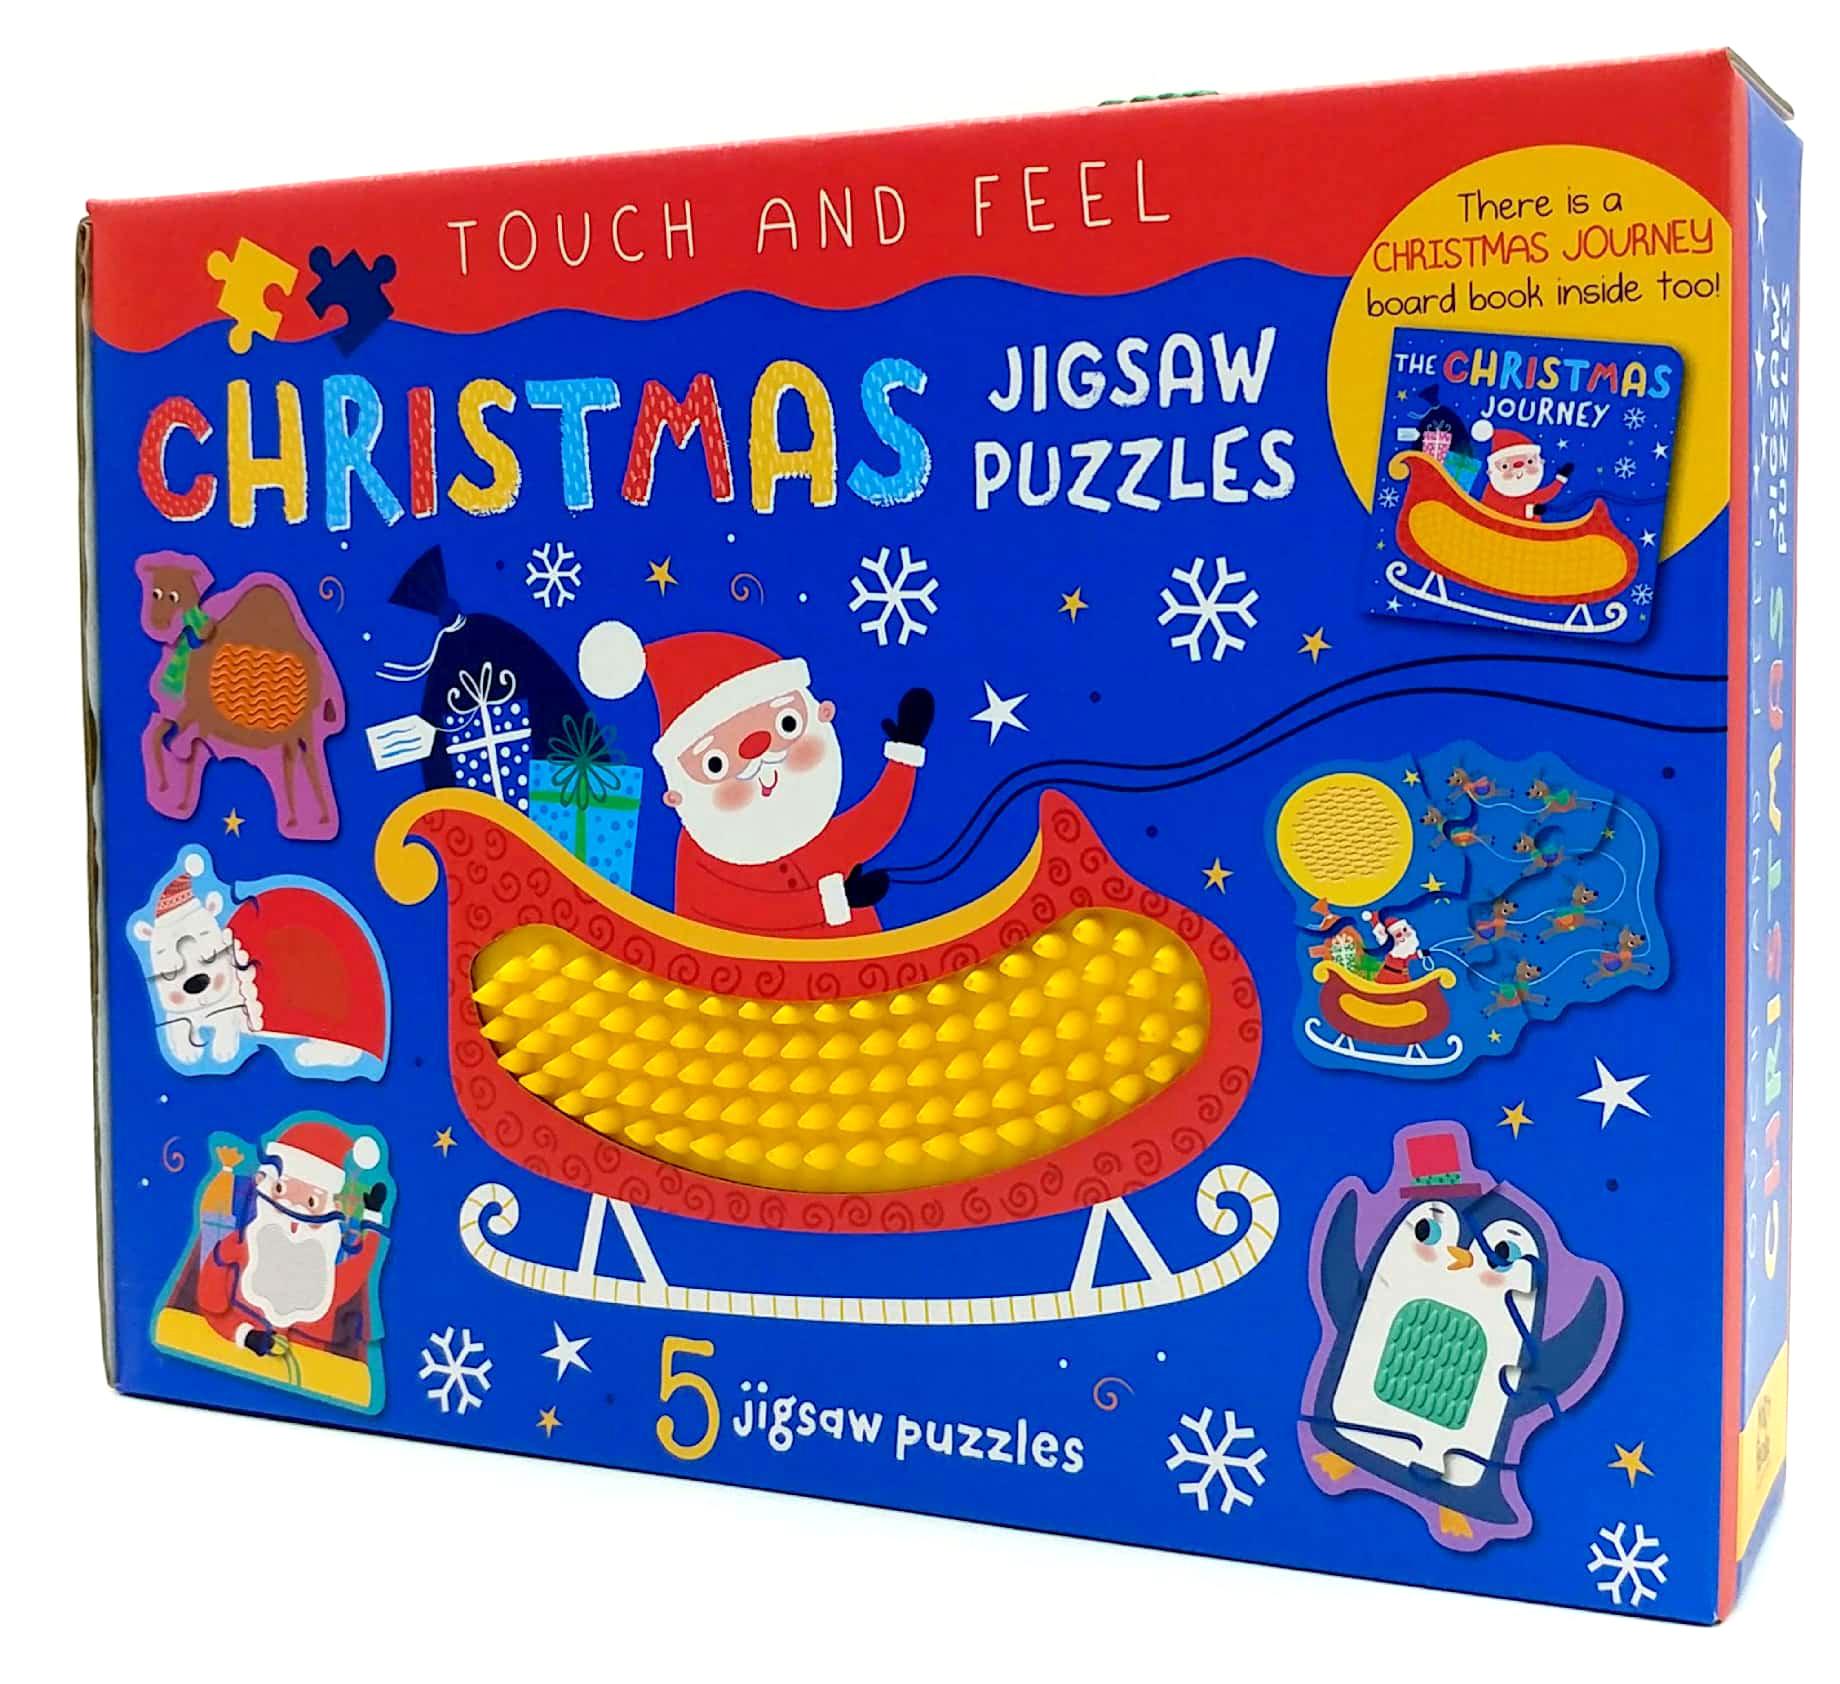 Touch And Feel - Christmas Jigsaw Puzzles